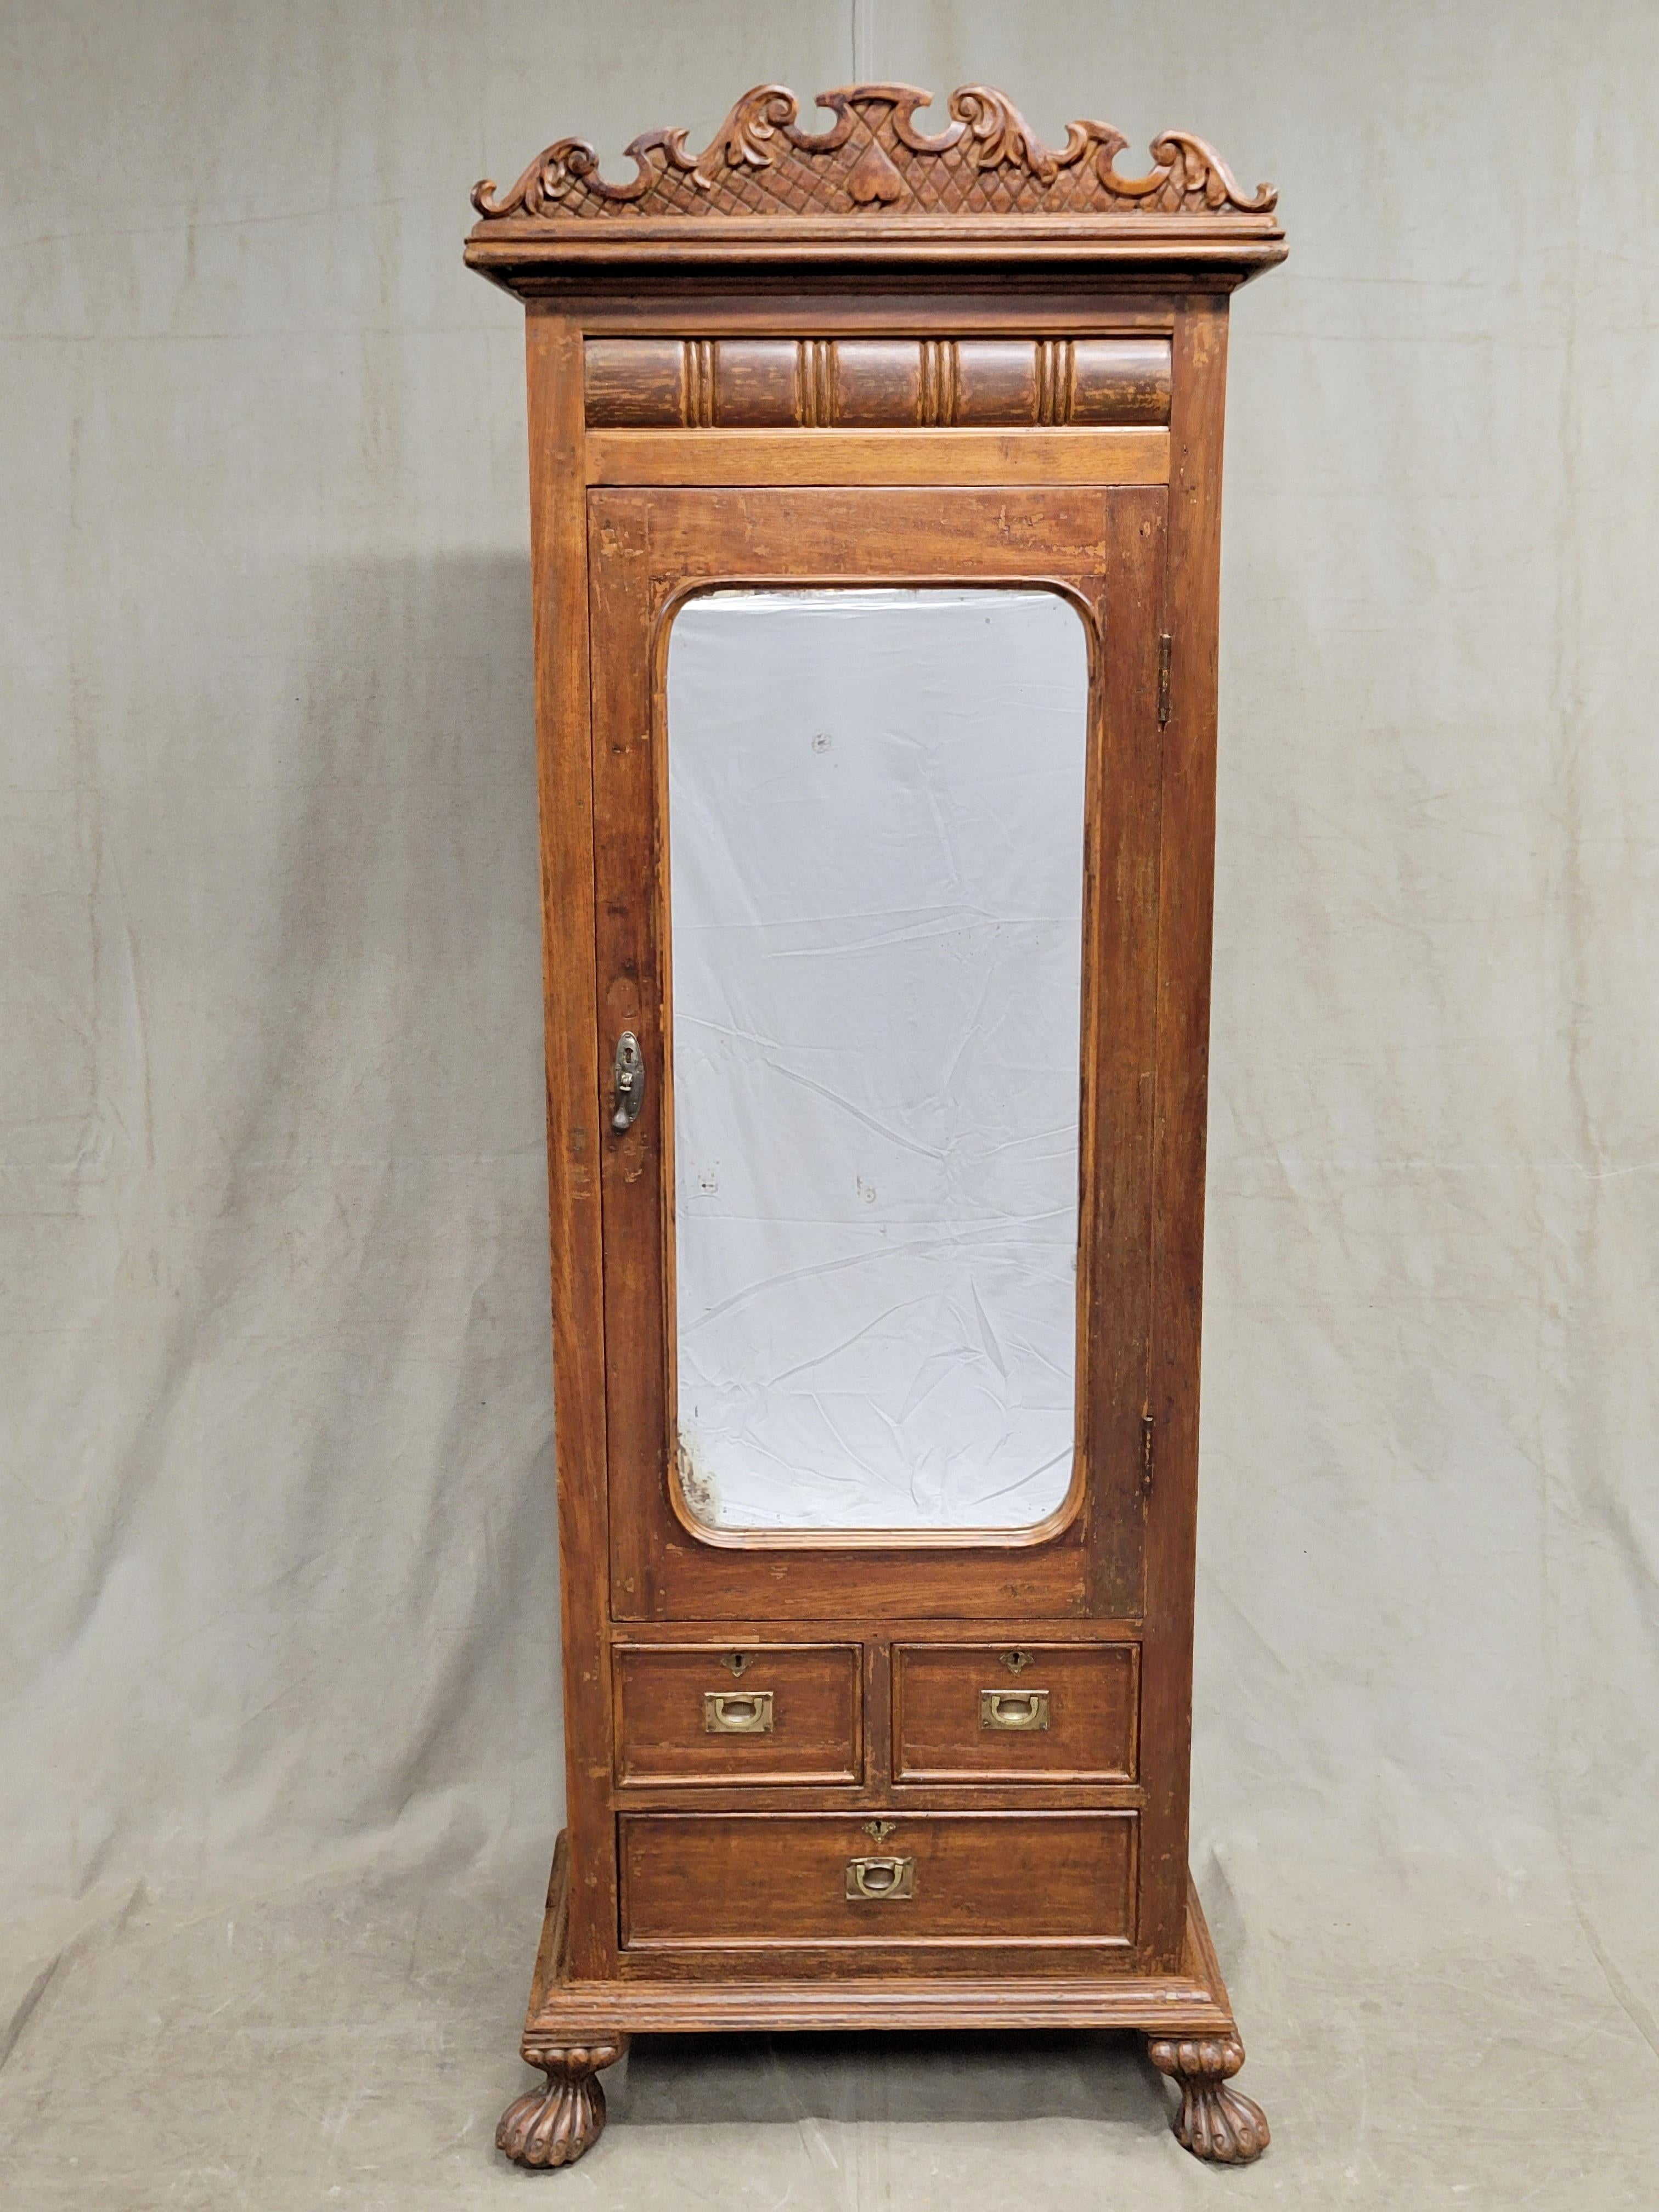 A sweet antique (late 1800s or early 1900s) Anglo-Indian teak petite armoire cupboard with mirror. A hand carved curvilinear crown, oversized paw feet, and overall small scale give this piece such unique flair. Campaign brass pulls accent the